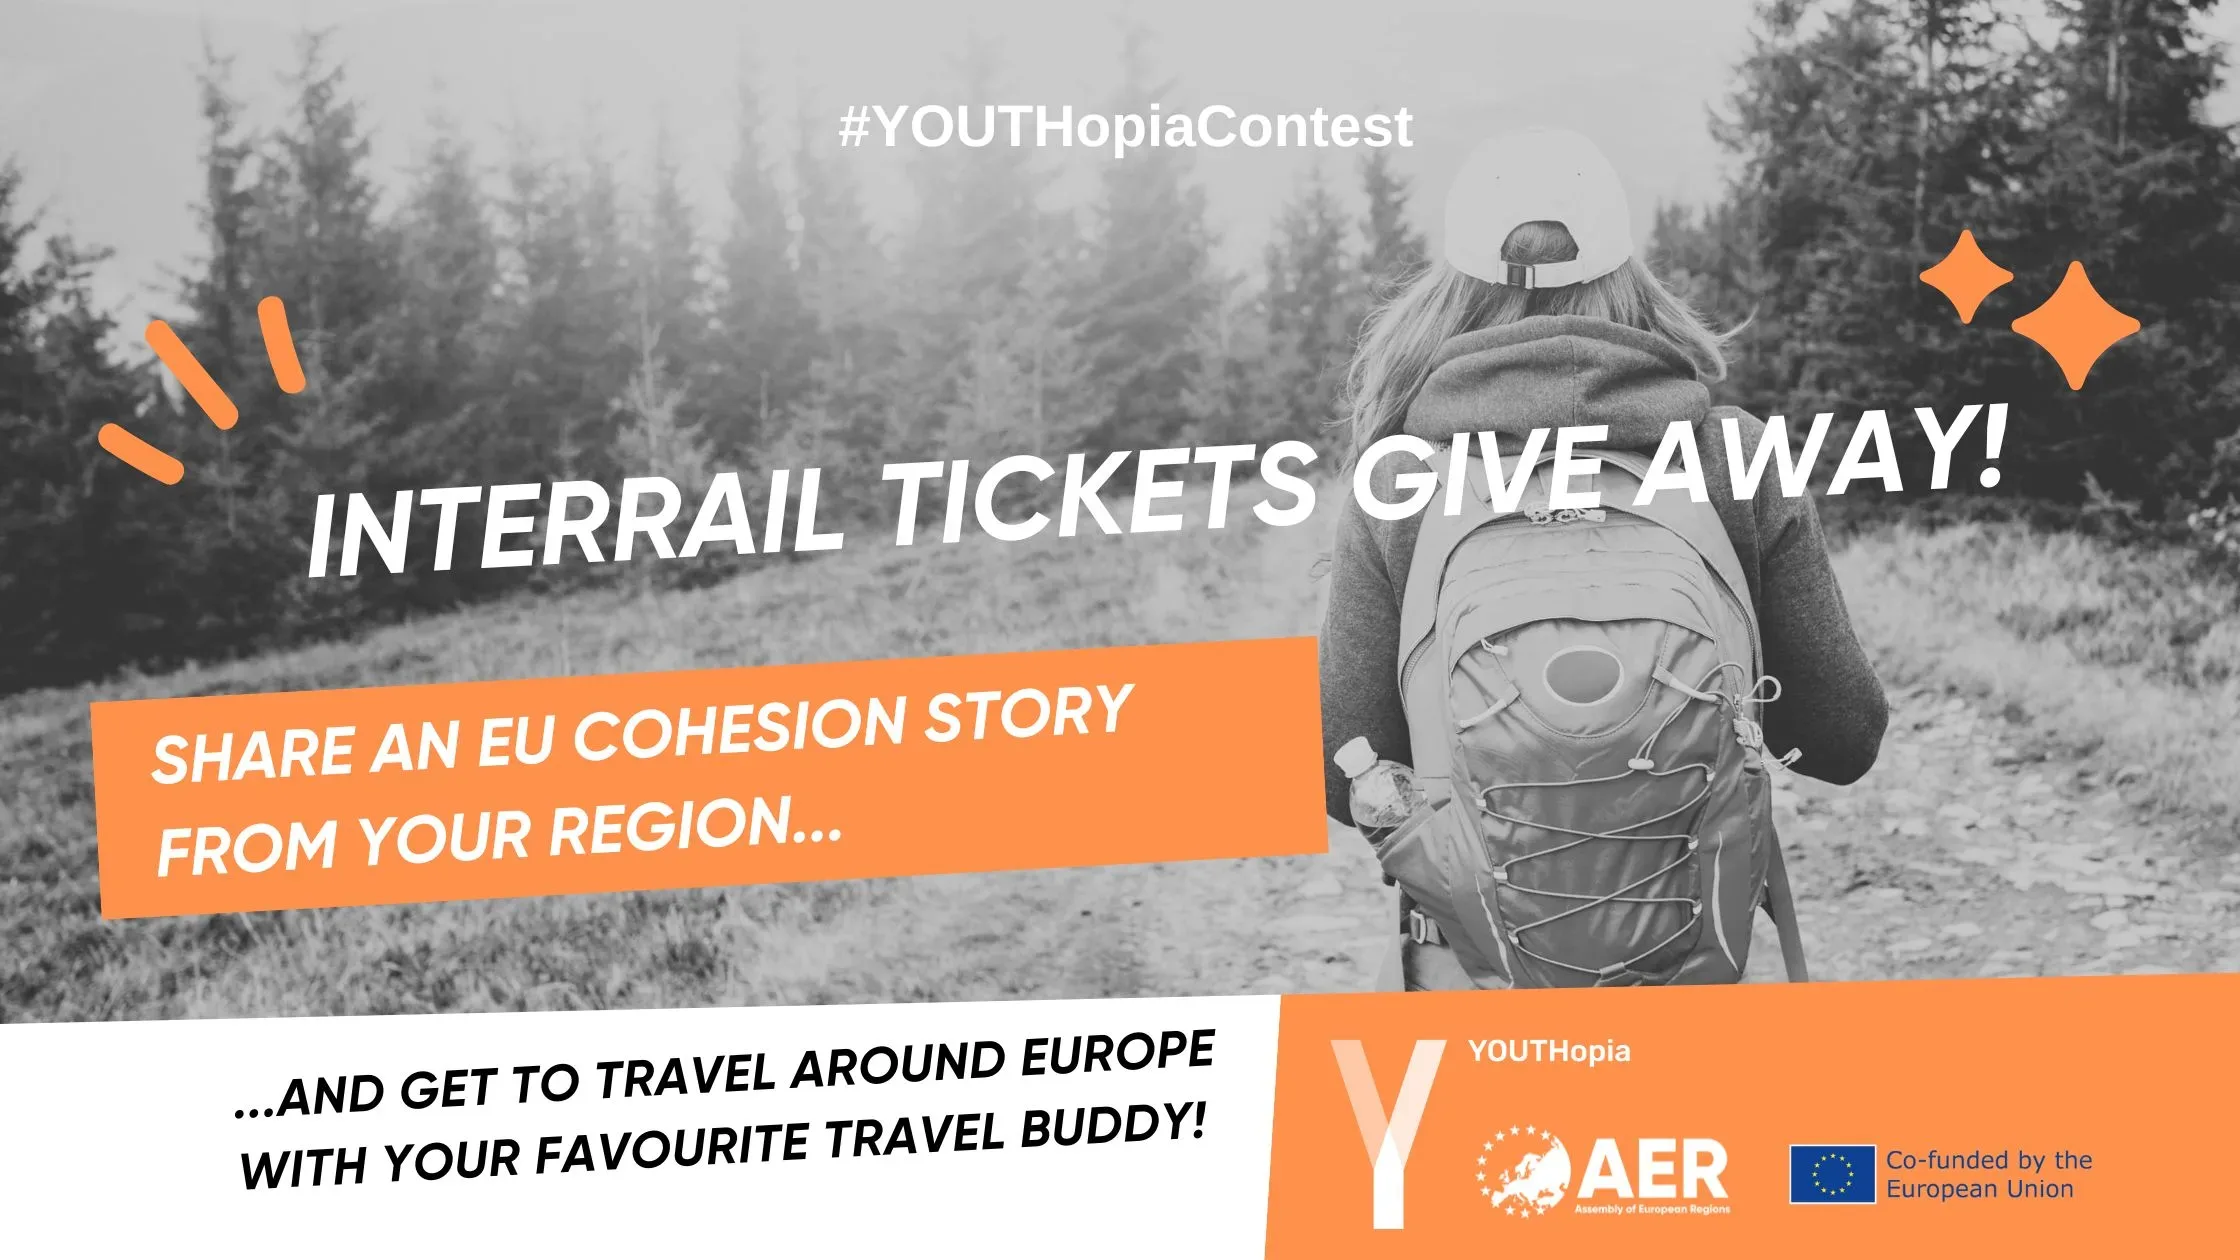 #HotlineCohesion - Get to Travel Across Europe with the #YOUTHopiaContest! (Deadline: 30 July)